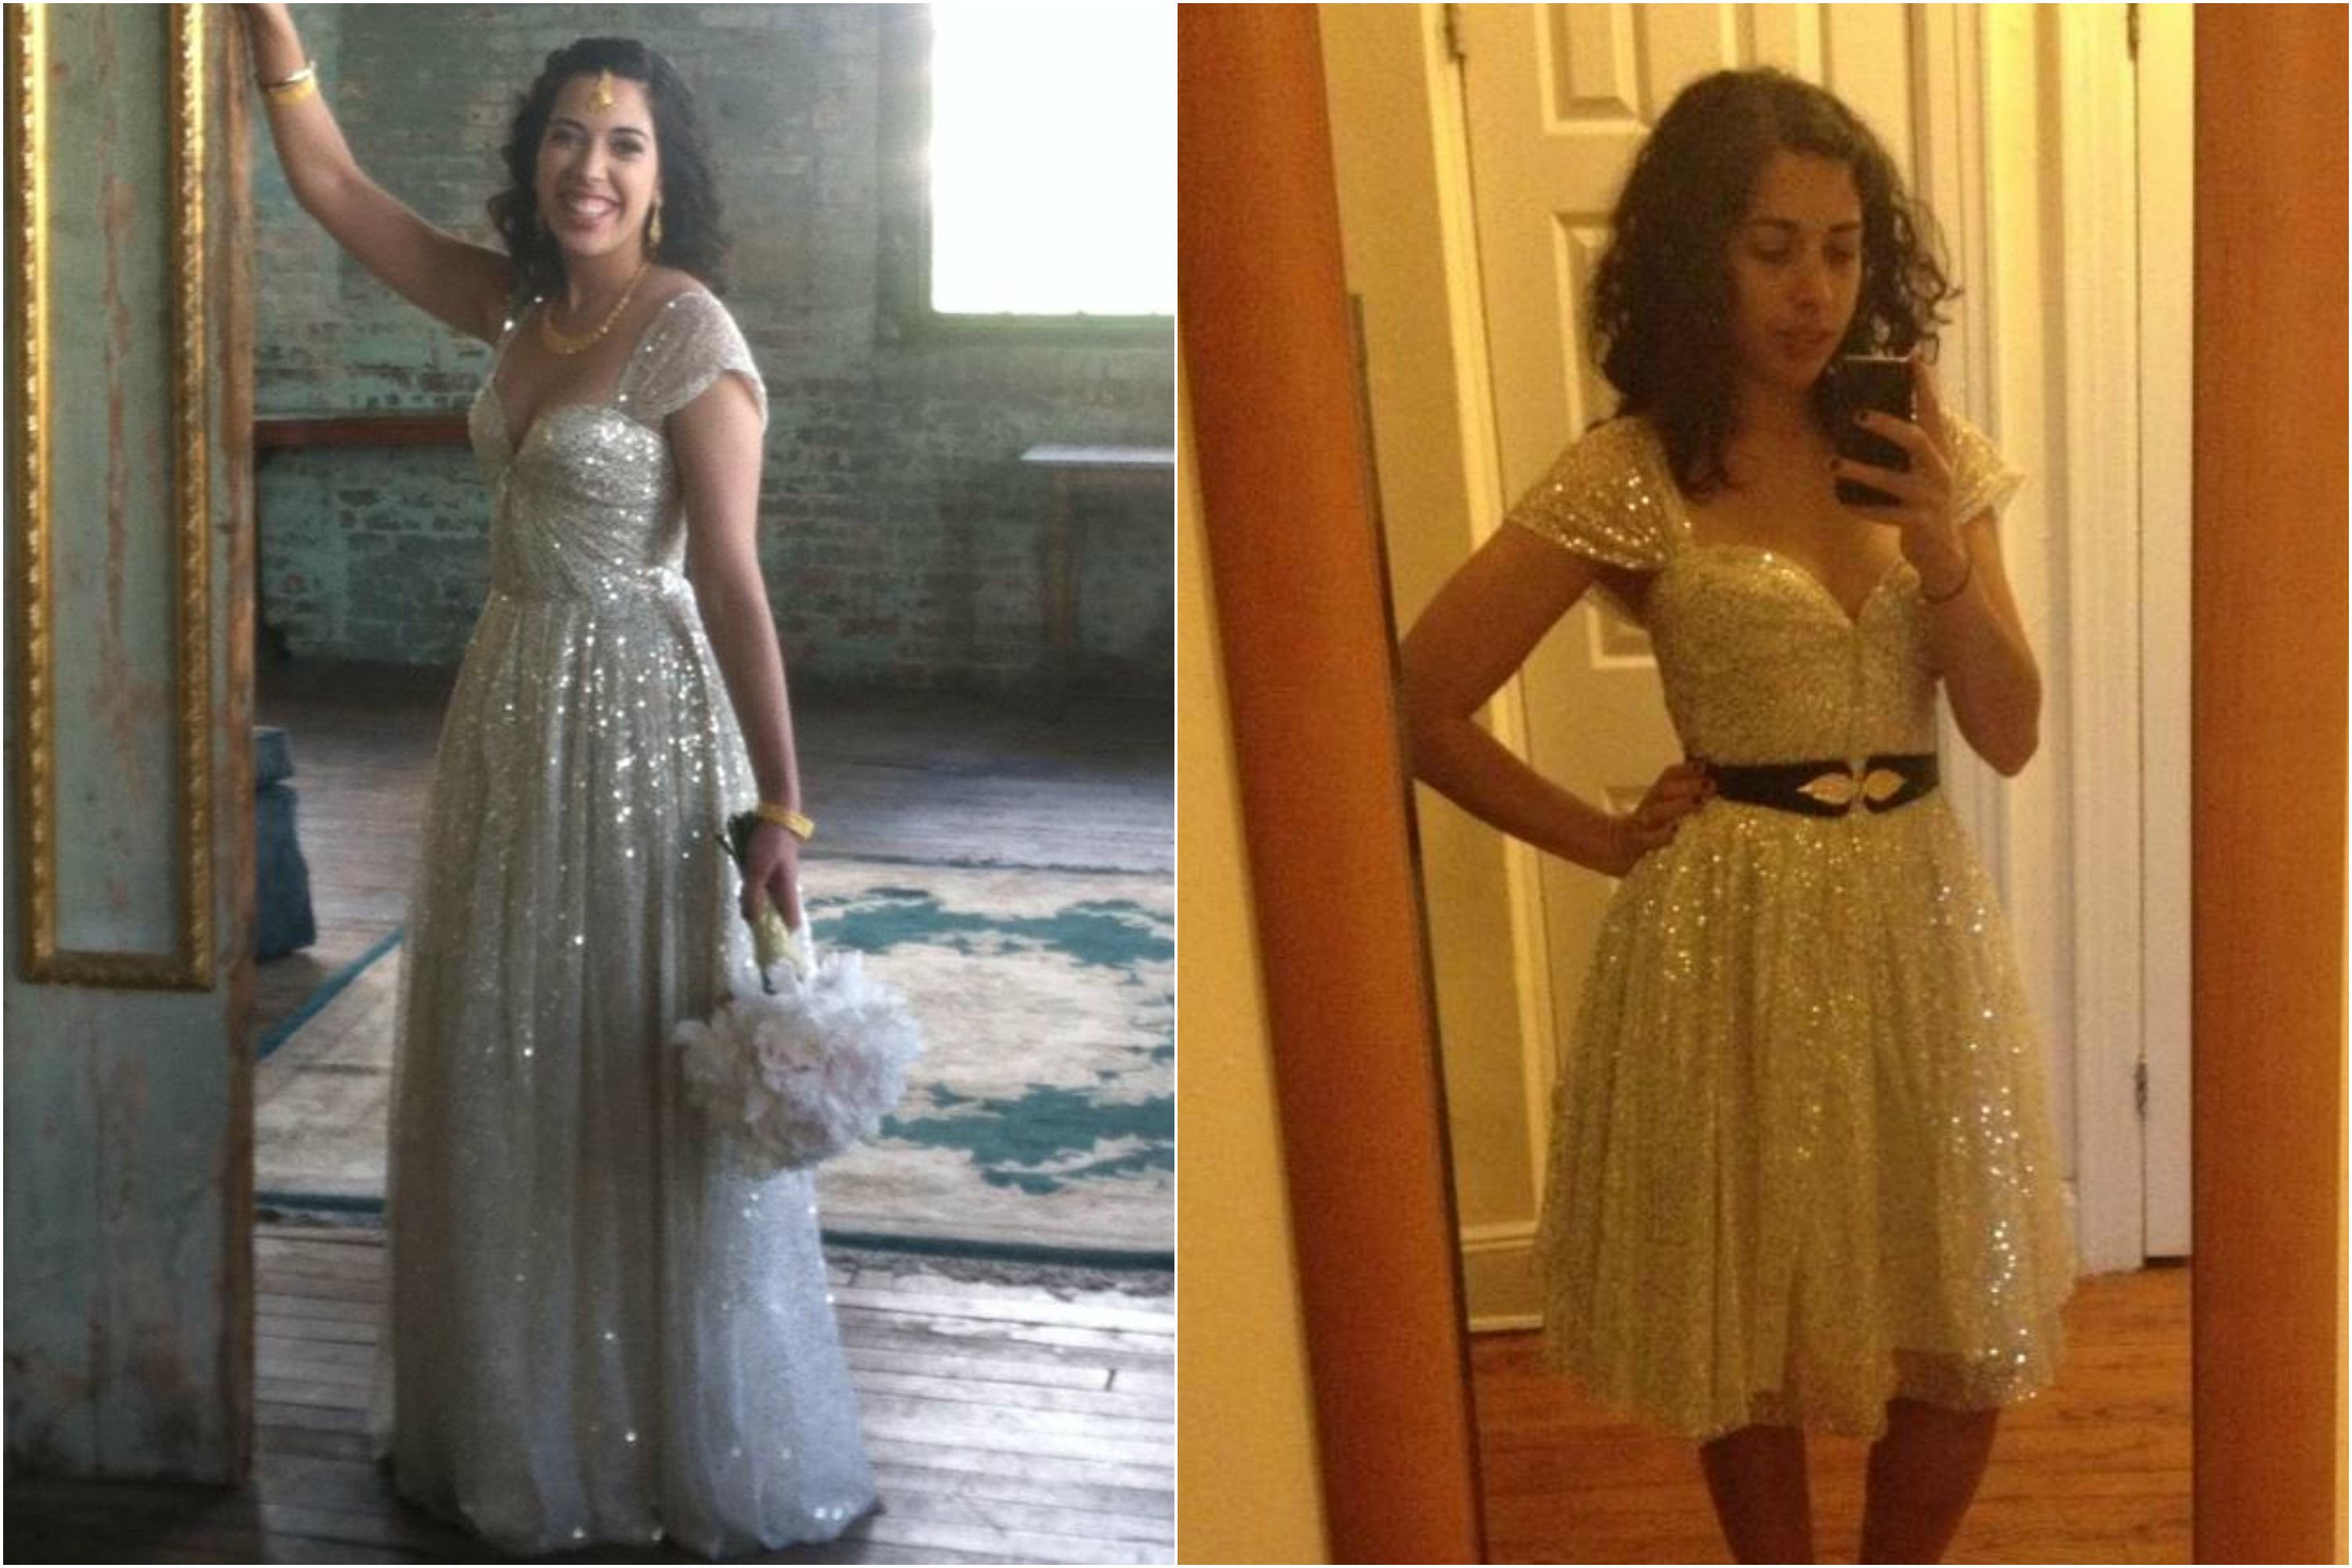 Turn your wedding gown into a cocktail dress